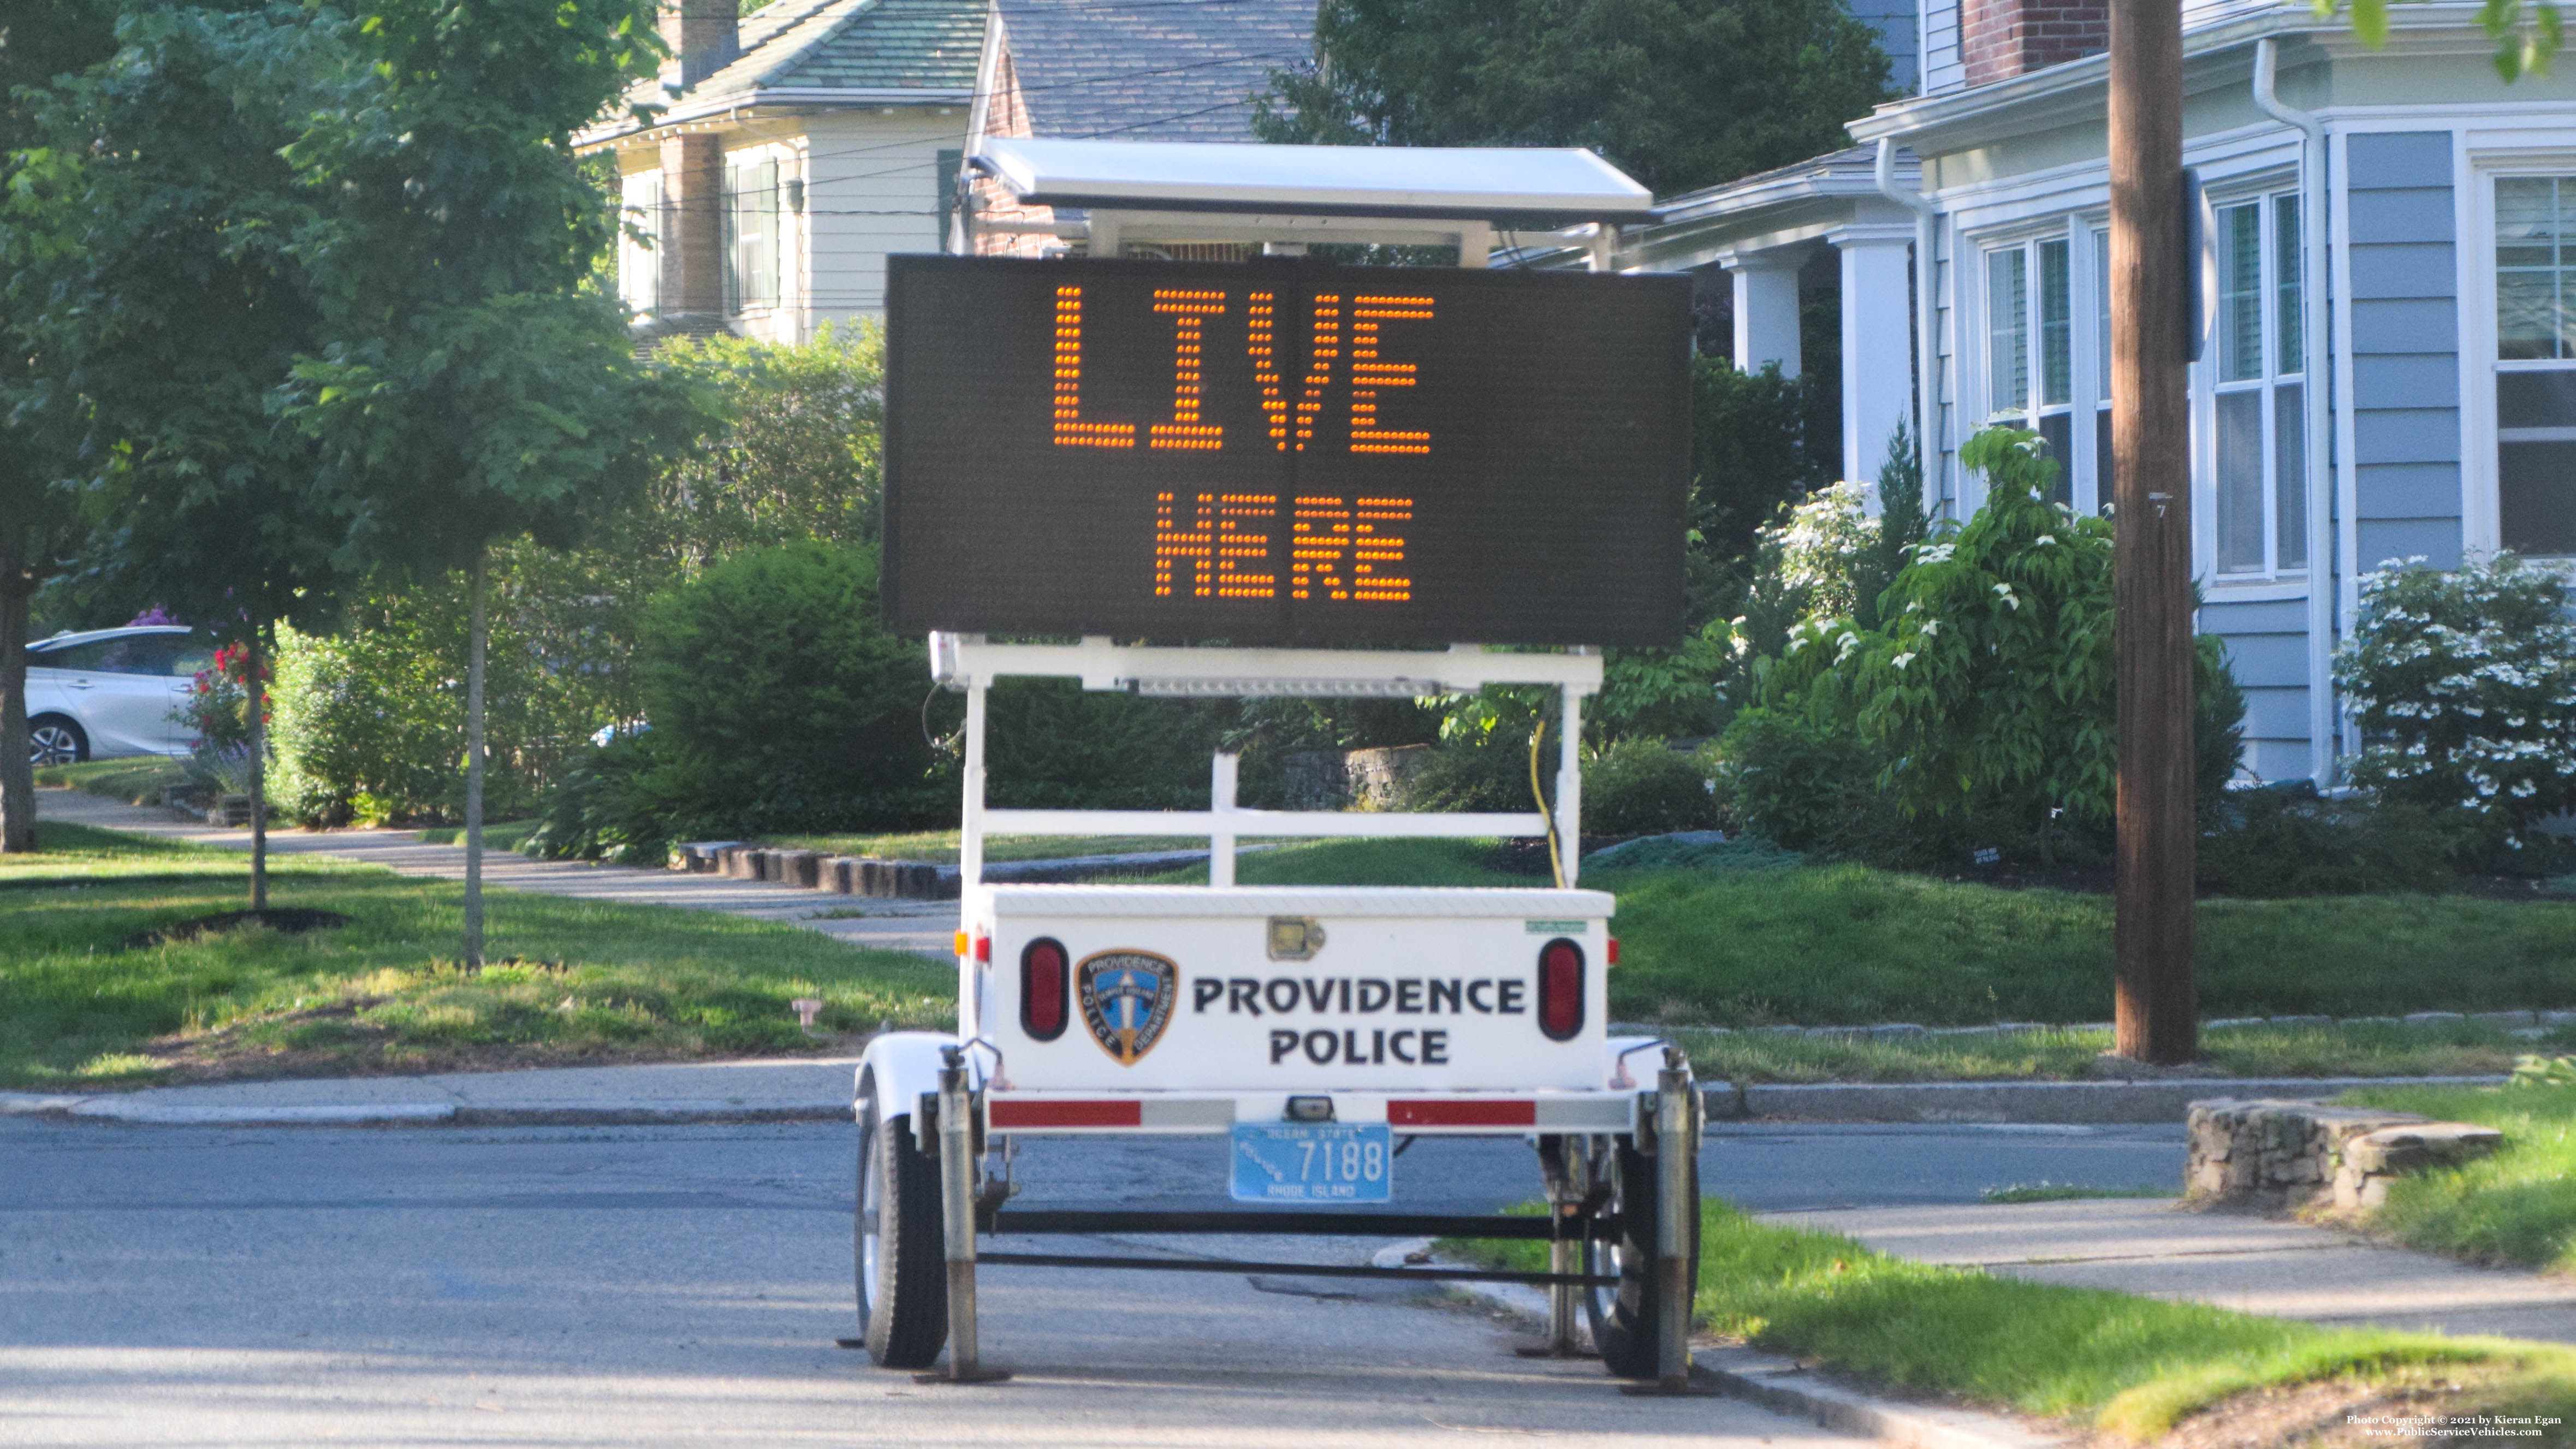 A photo  of Providence Police
            Message Trailer 7188, a 2006-2011 All Traffic Solutions Message Trailer             taken by Kieran Egan